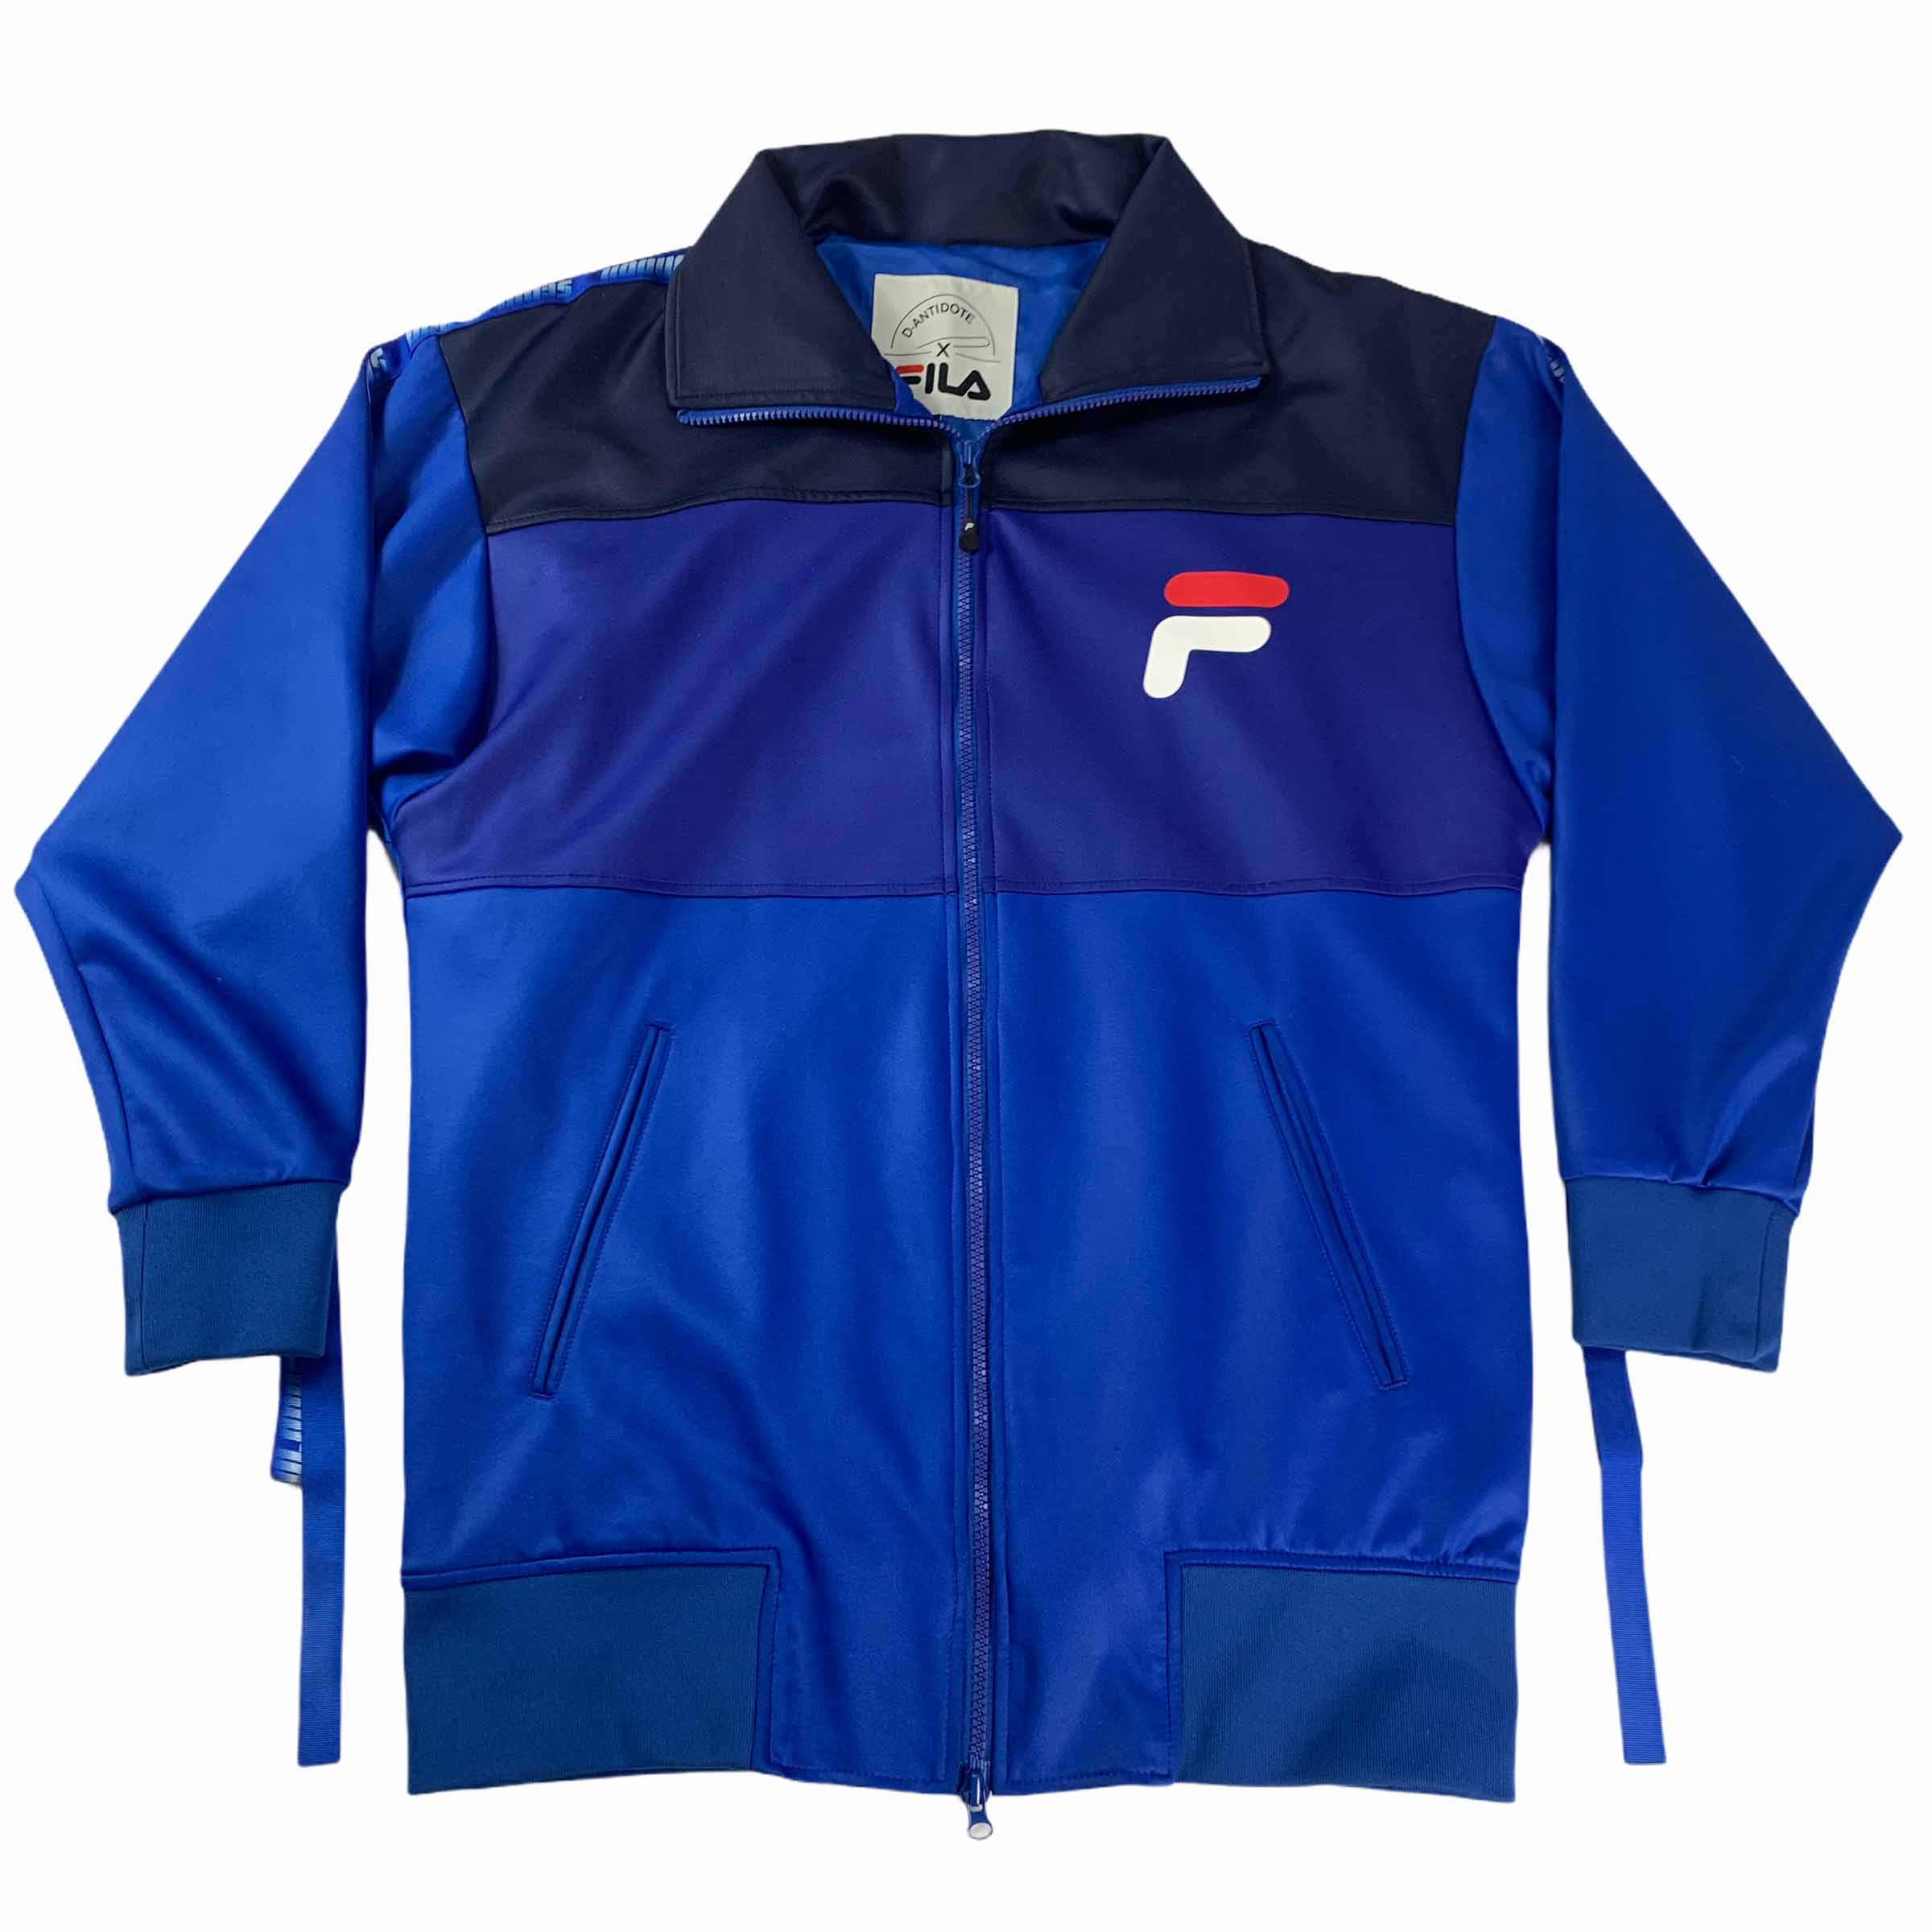 [D-Antidote x Fila] Color Block Hanging Tap Traning Top - Size M